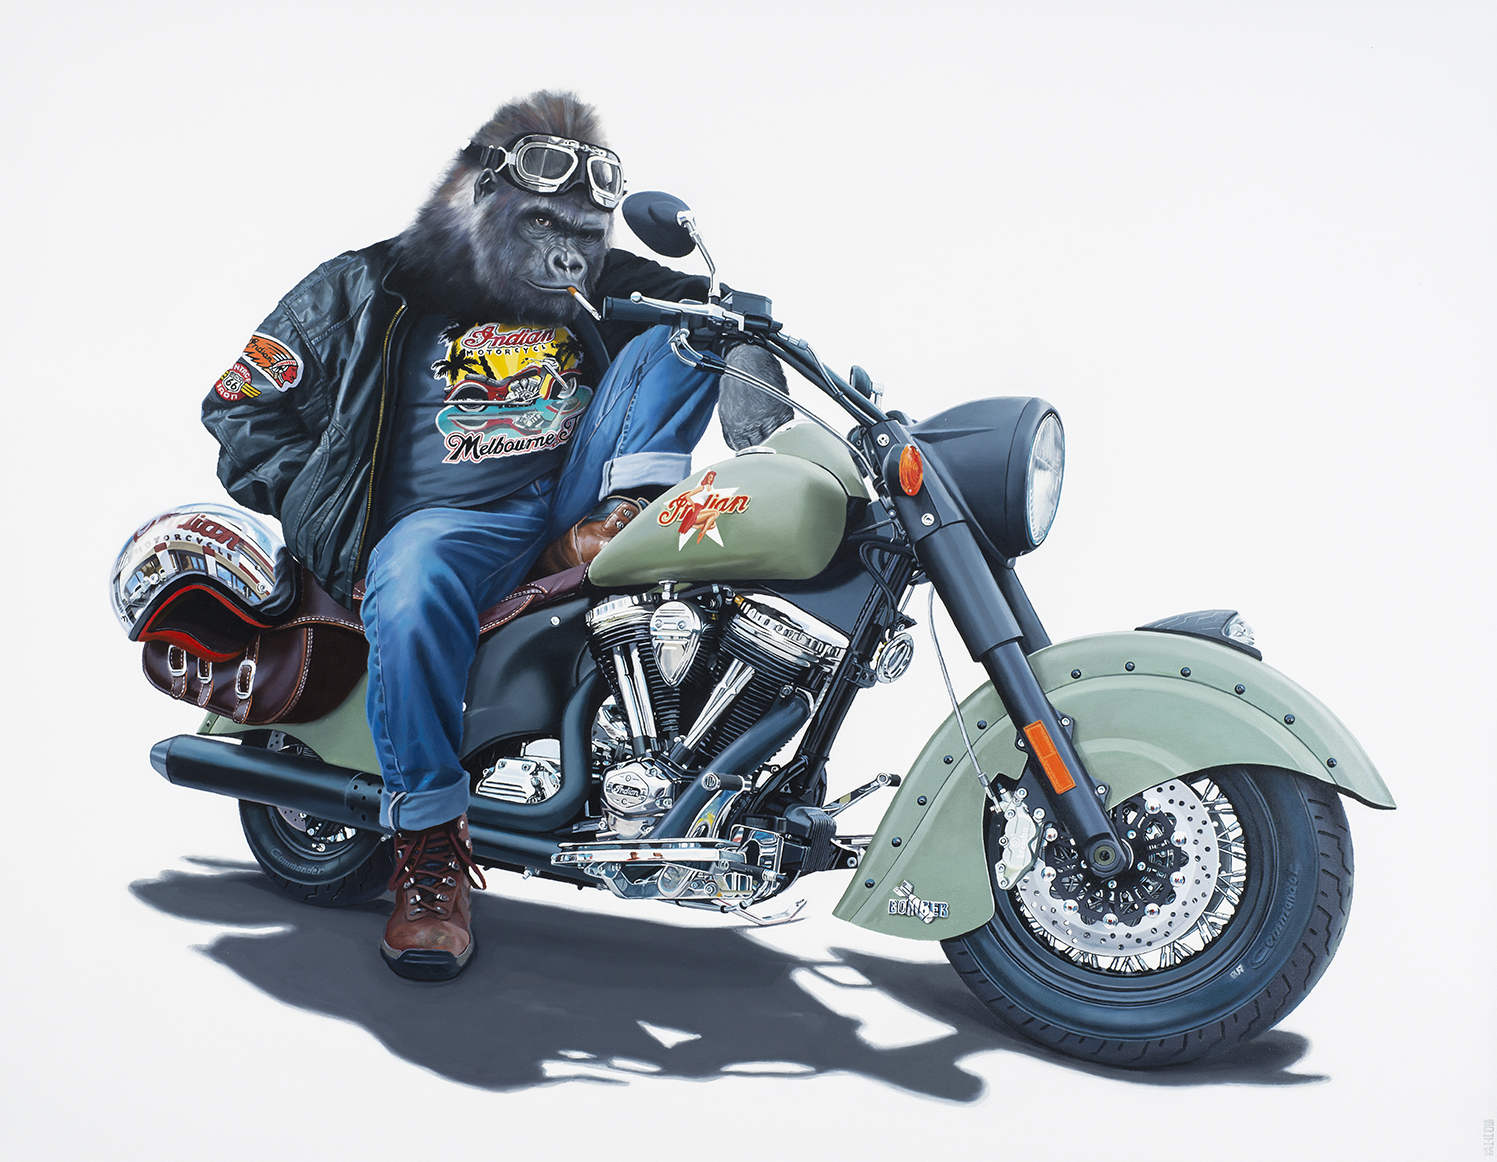 A gorilla on an Indian motorcycle - Tony South - Bomber and the Beast